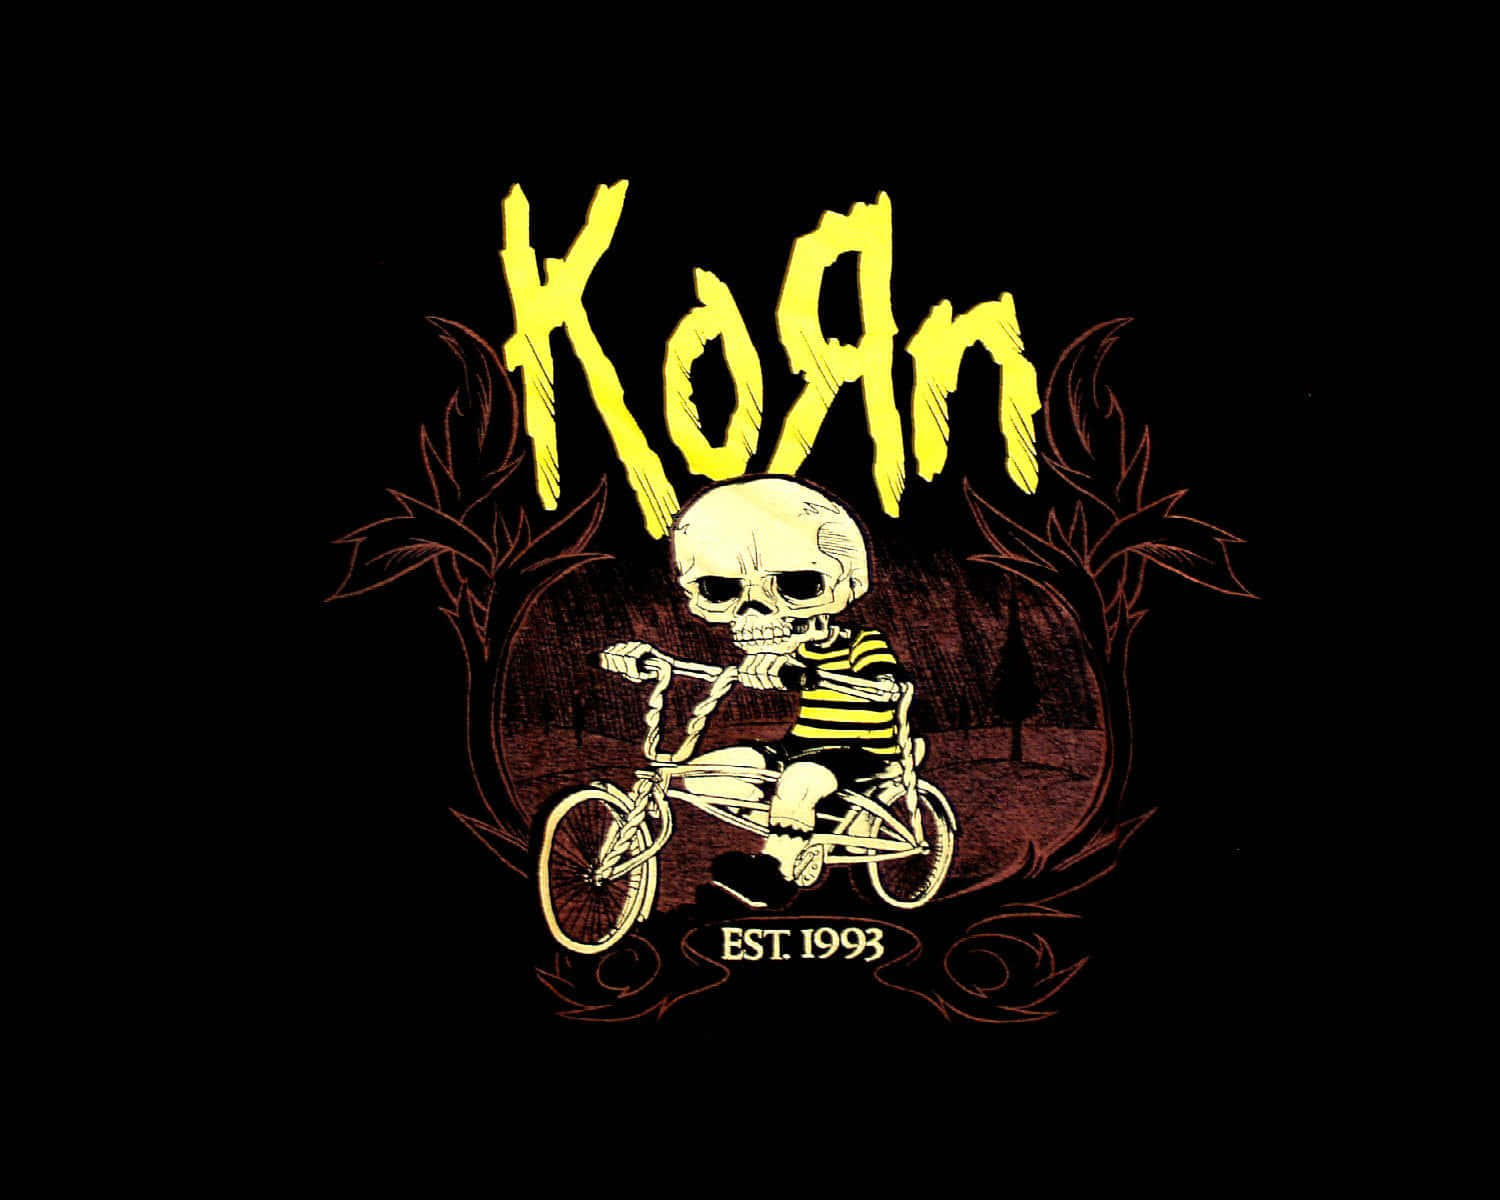 Iconic Korn on Stage Wallpaper